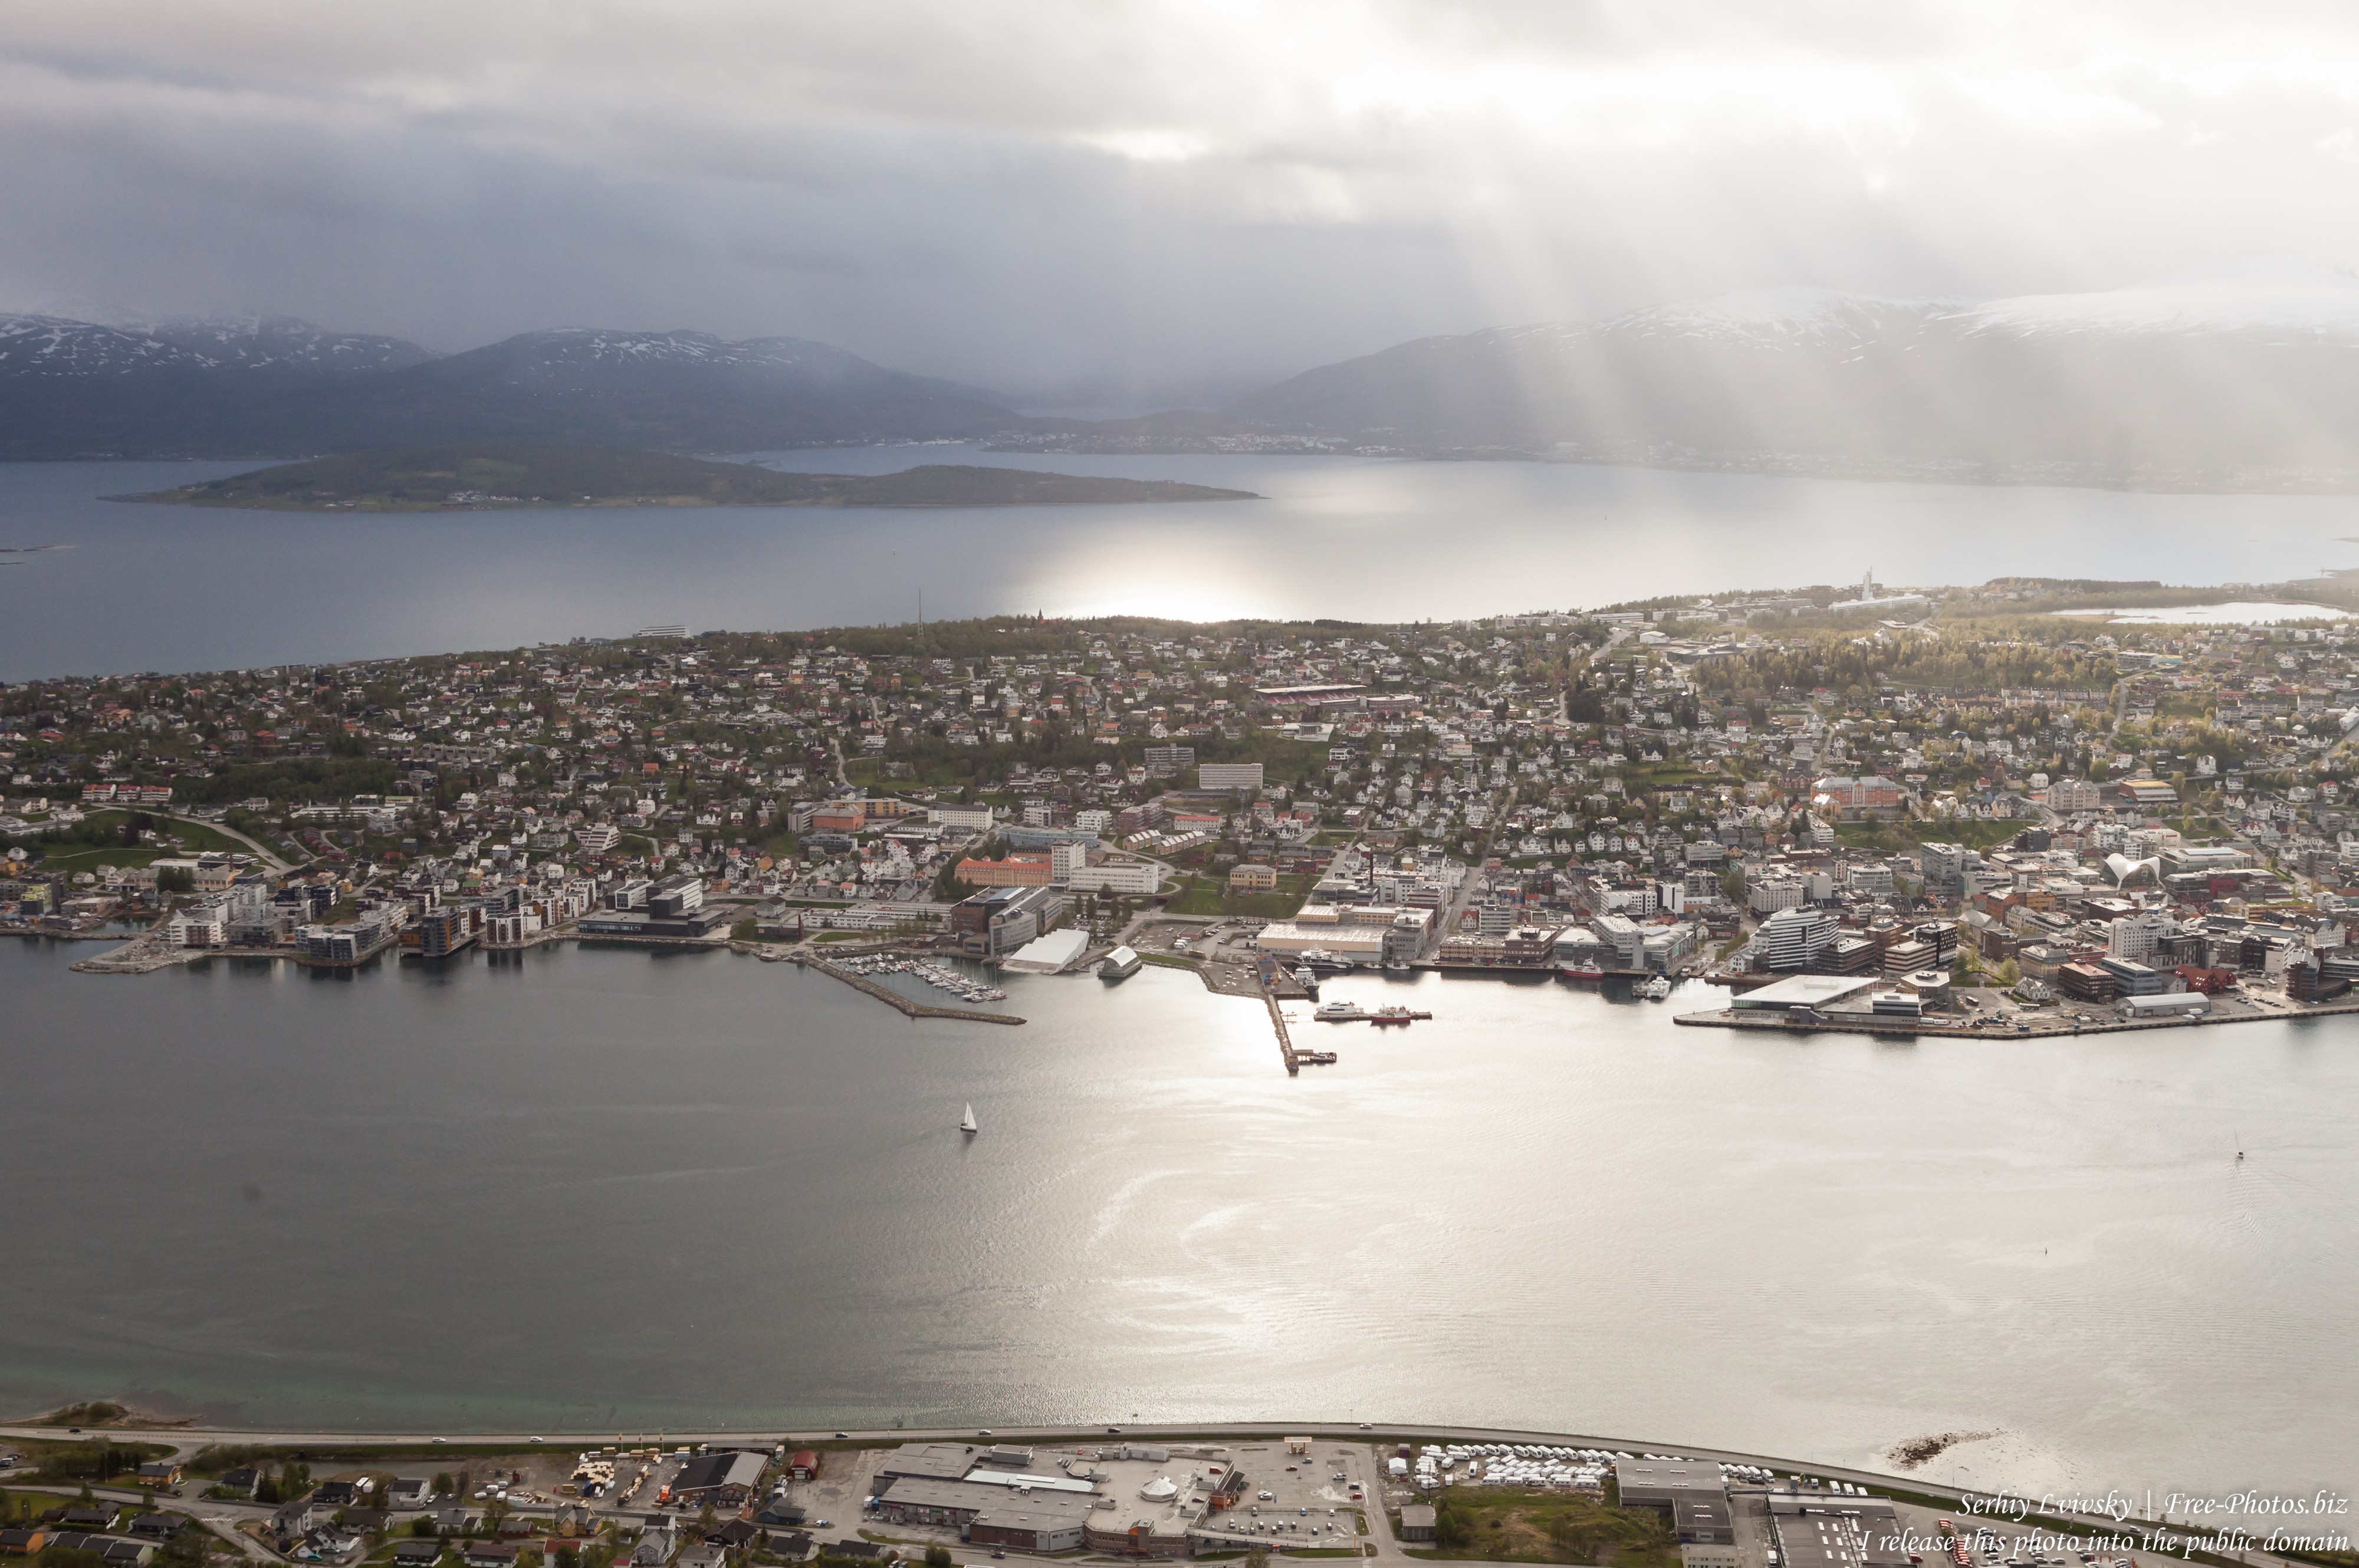 Tromso, Norway, photographed in June 2018 by Serhiy Lvivsky, picture 4